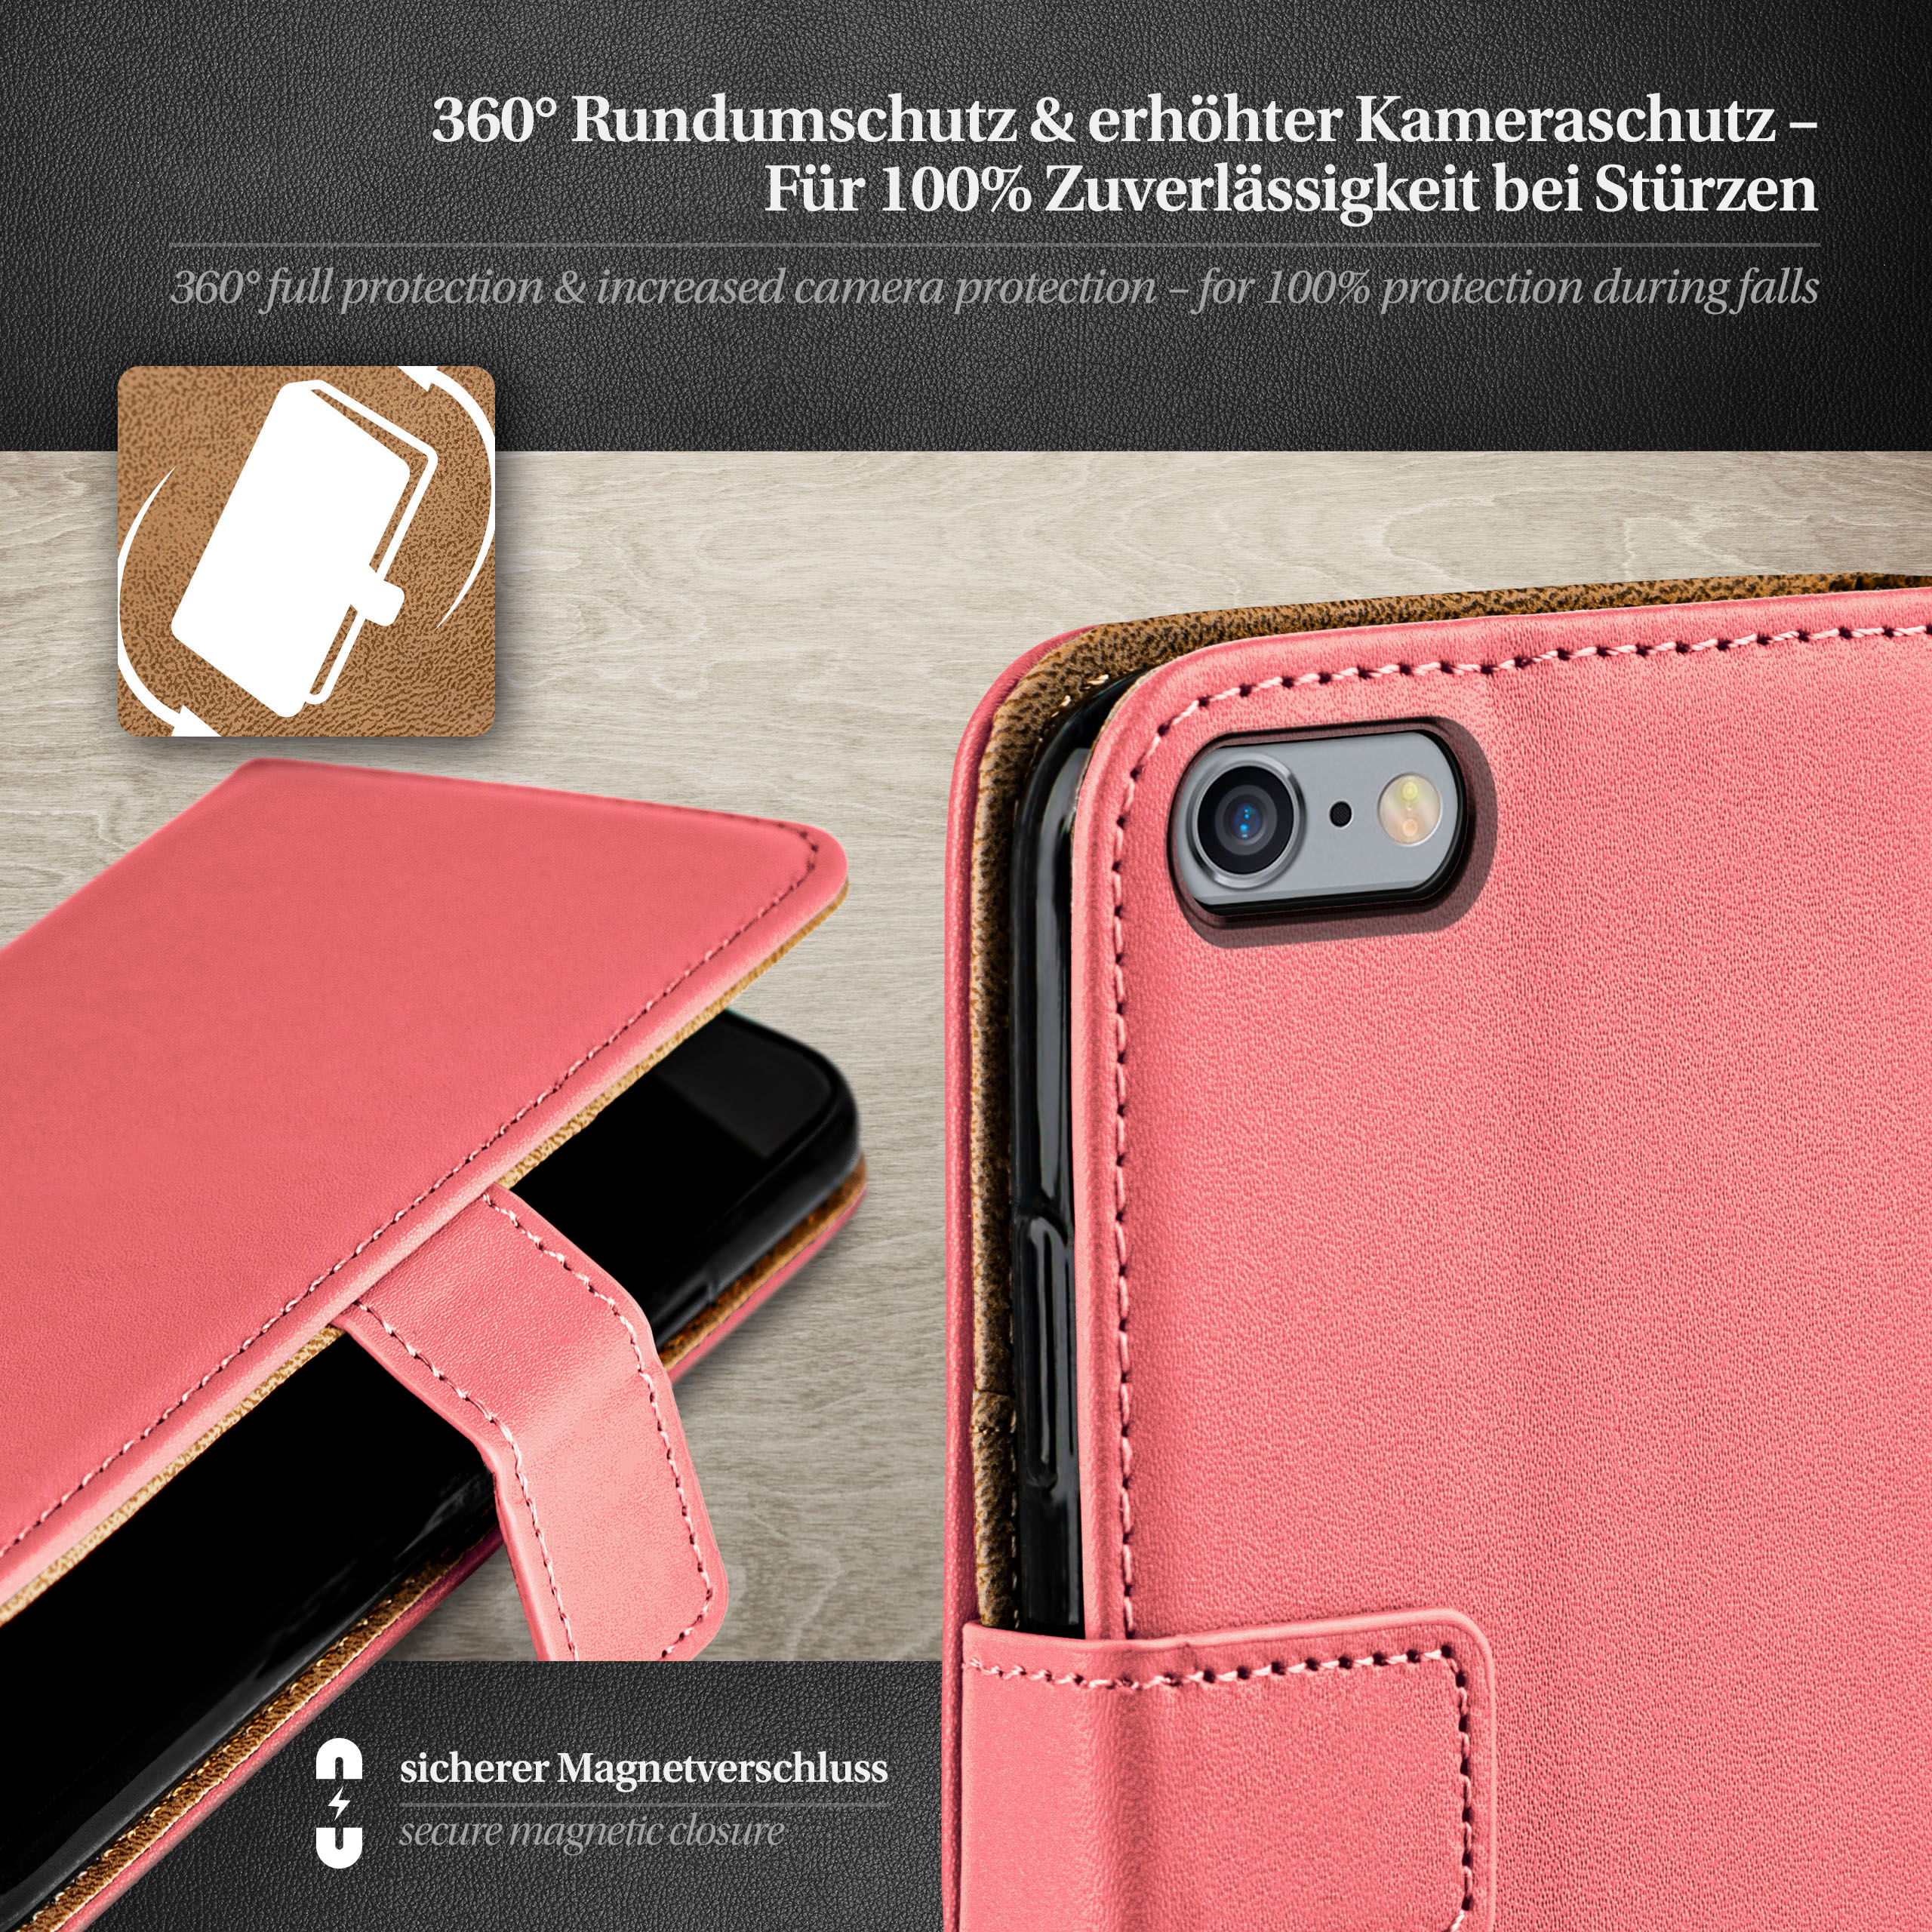 Case, 6s Book / Apple, iPhone Coral-Rose Bookcover, MOEX iPhone 6,